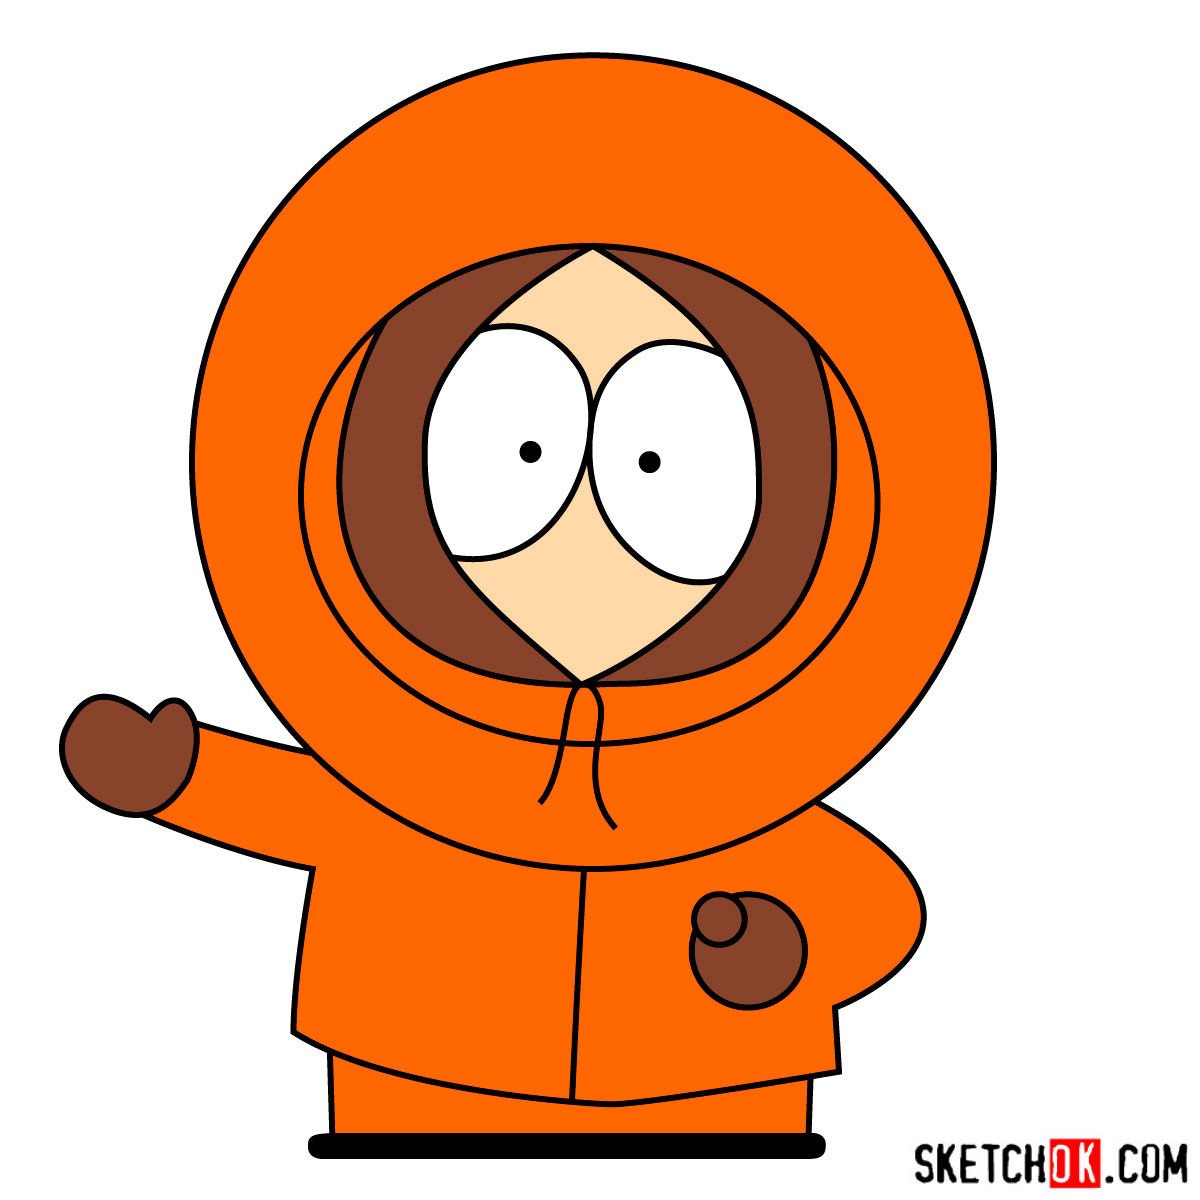 How to draw Kenny McCormick from South Park